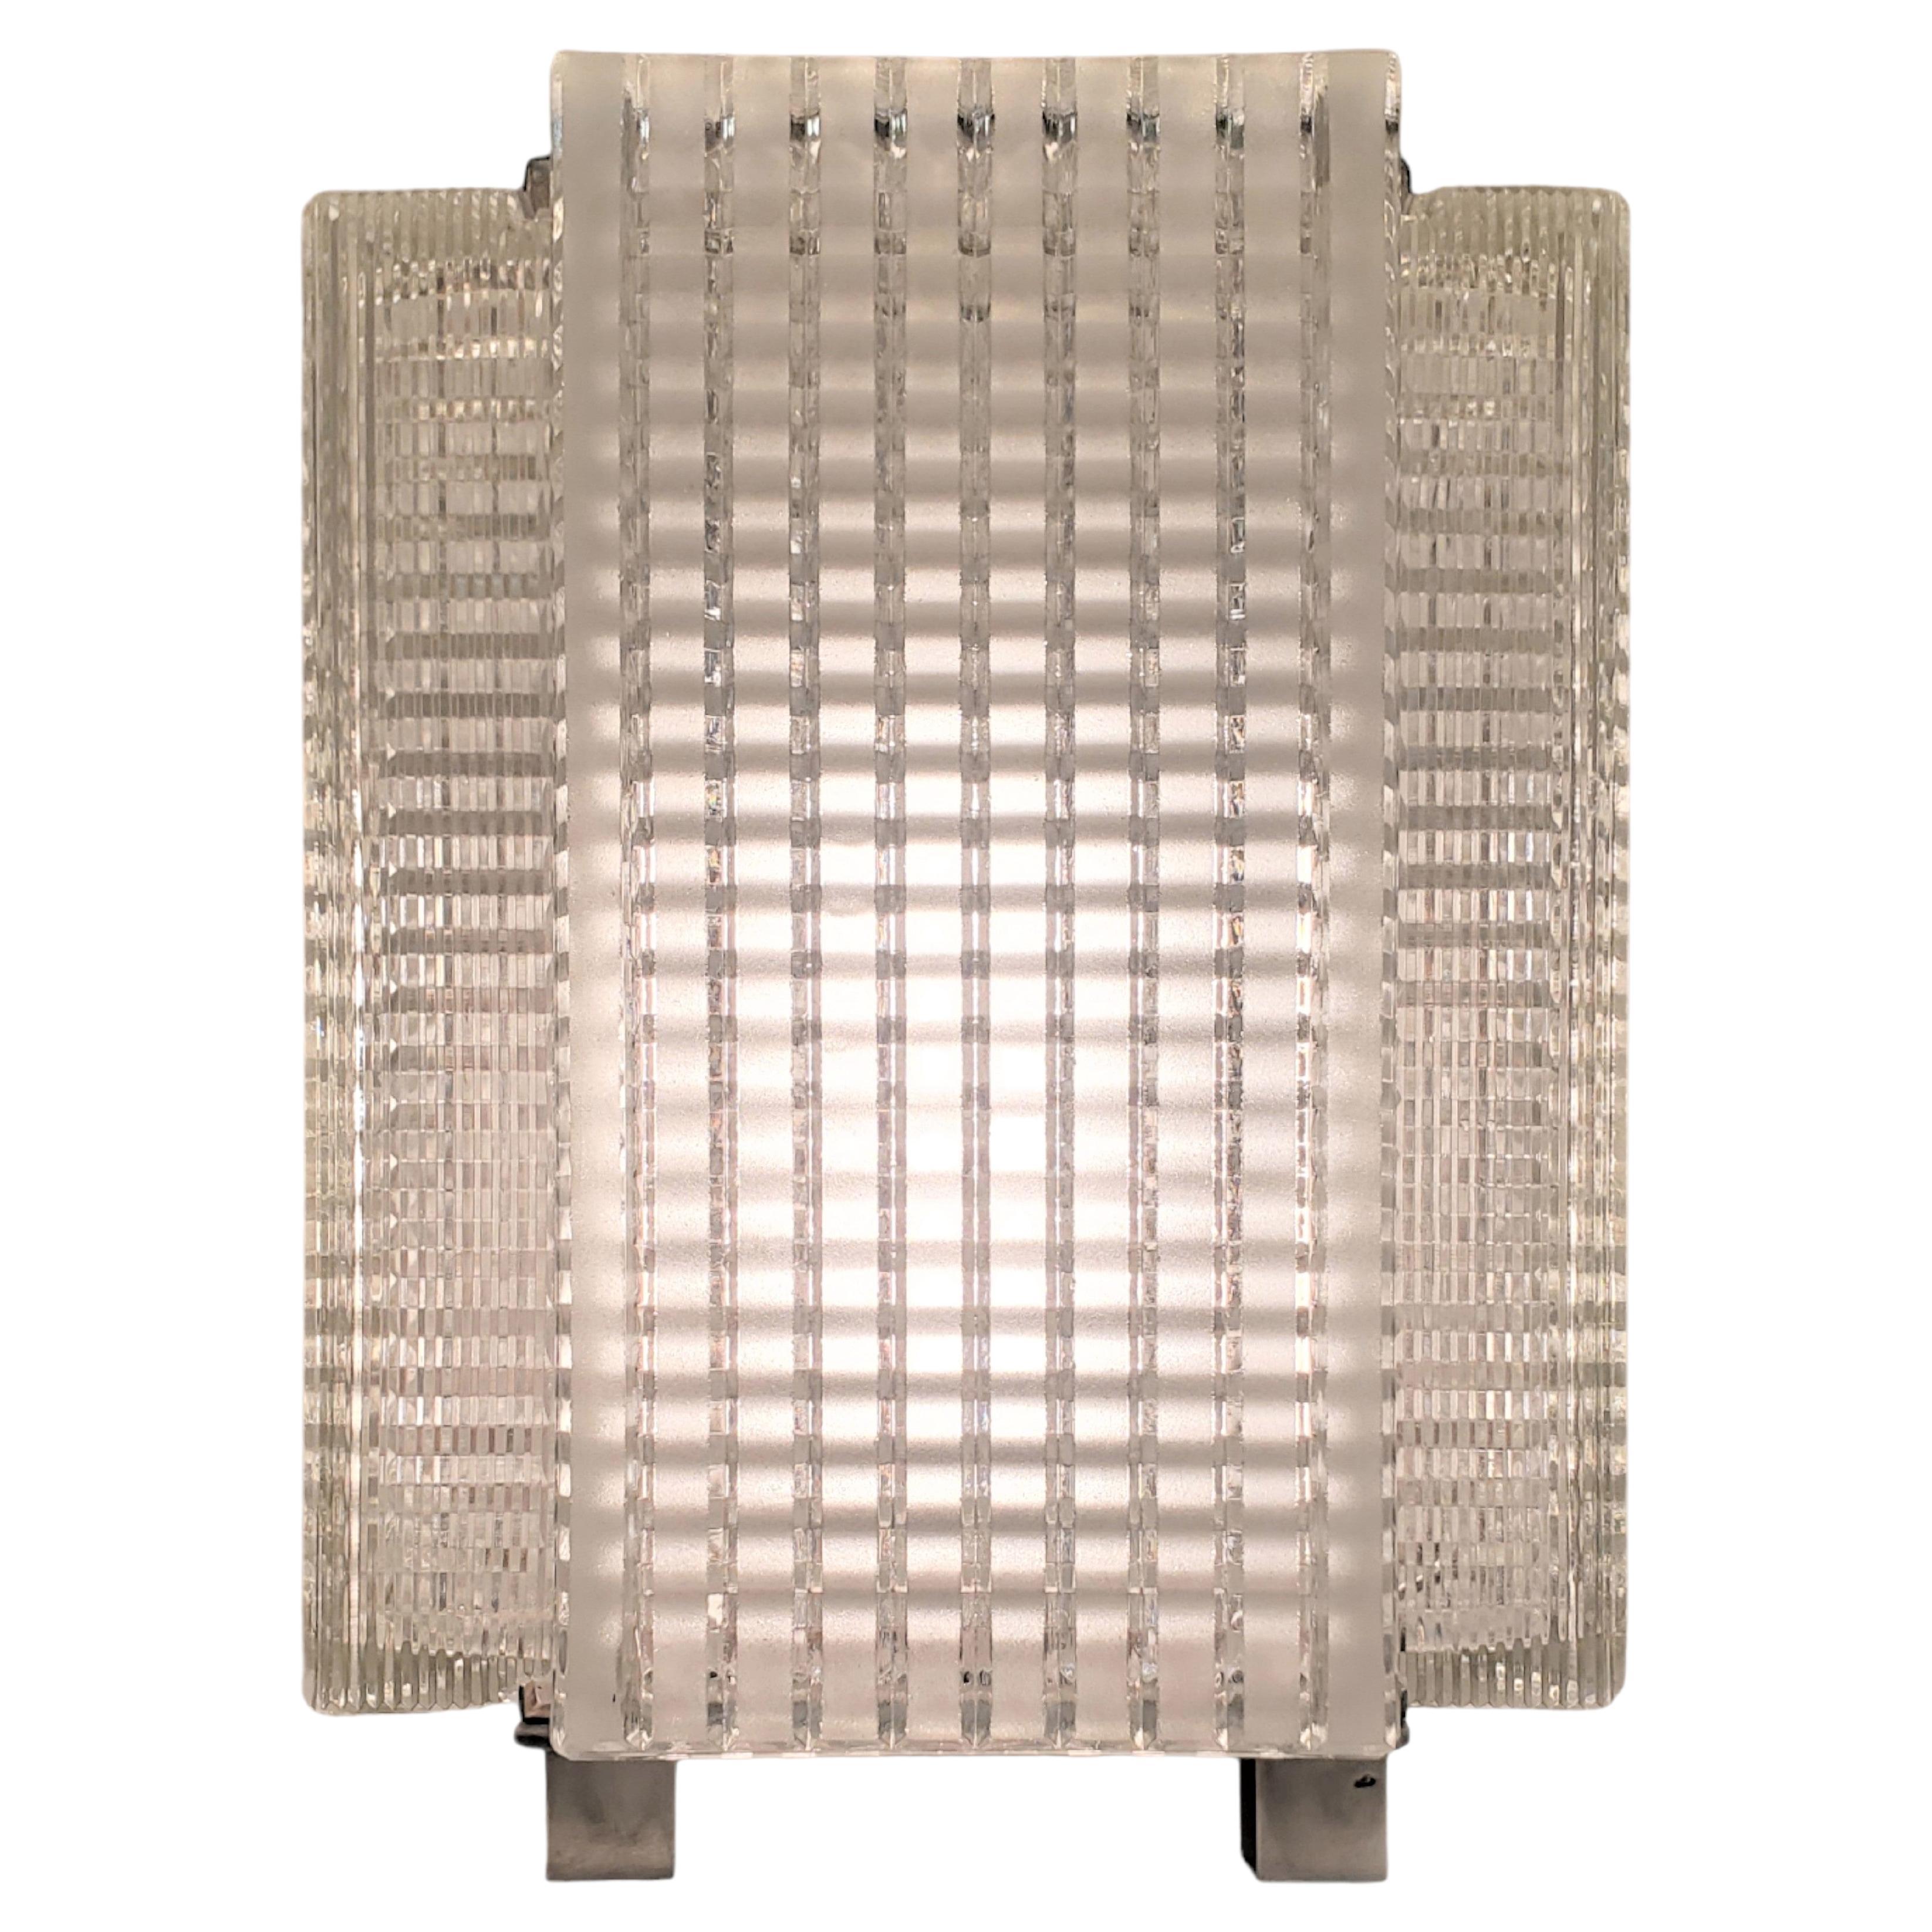 A pair of Midcentury reticulated glass table lamps with nickeled trim.
Four heavily molded art glass panels of rectangular form create this Minimalist glass structure.
Highly architectural in overall form with motif of interlacing lines in a network